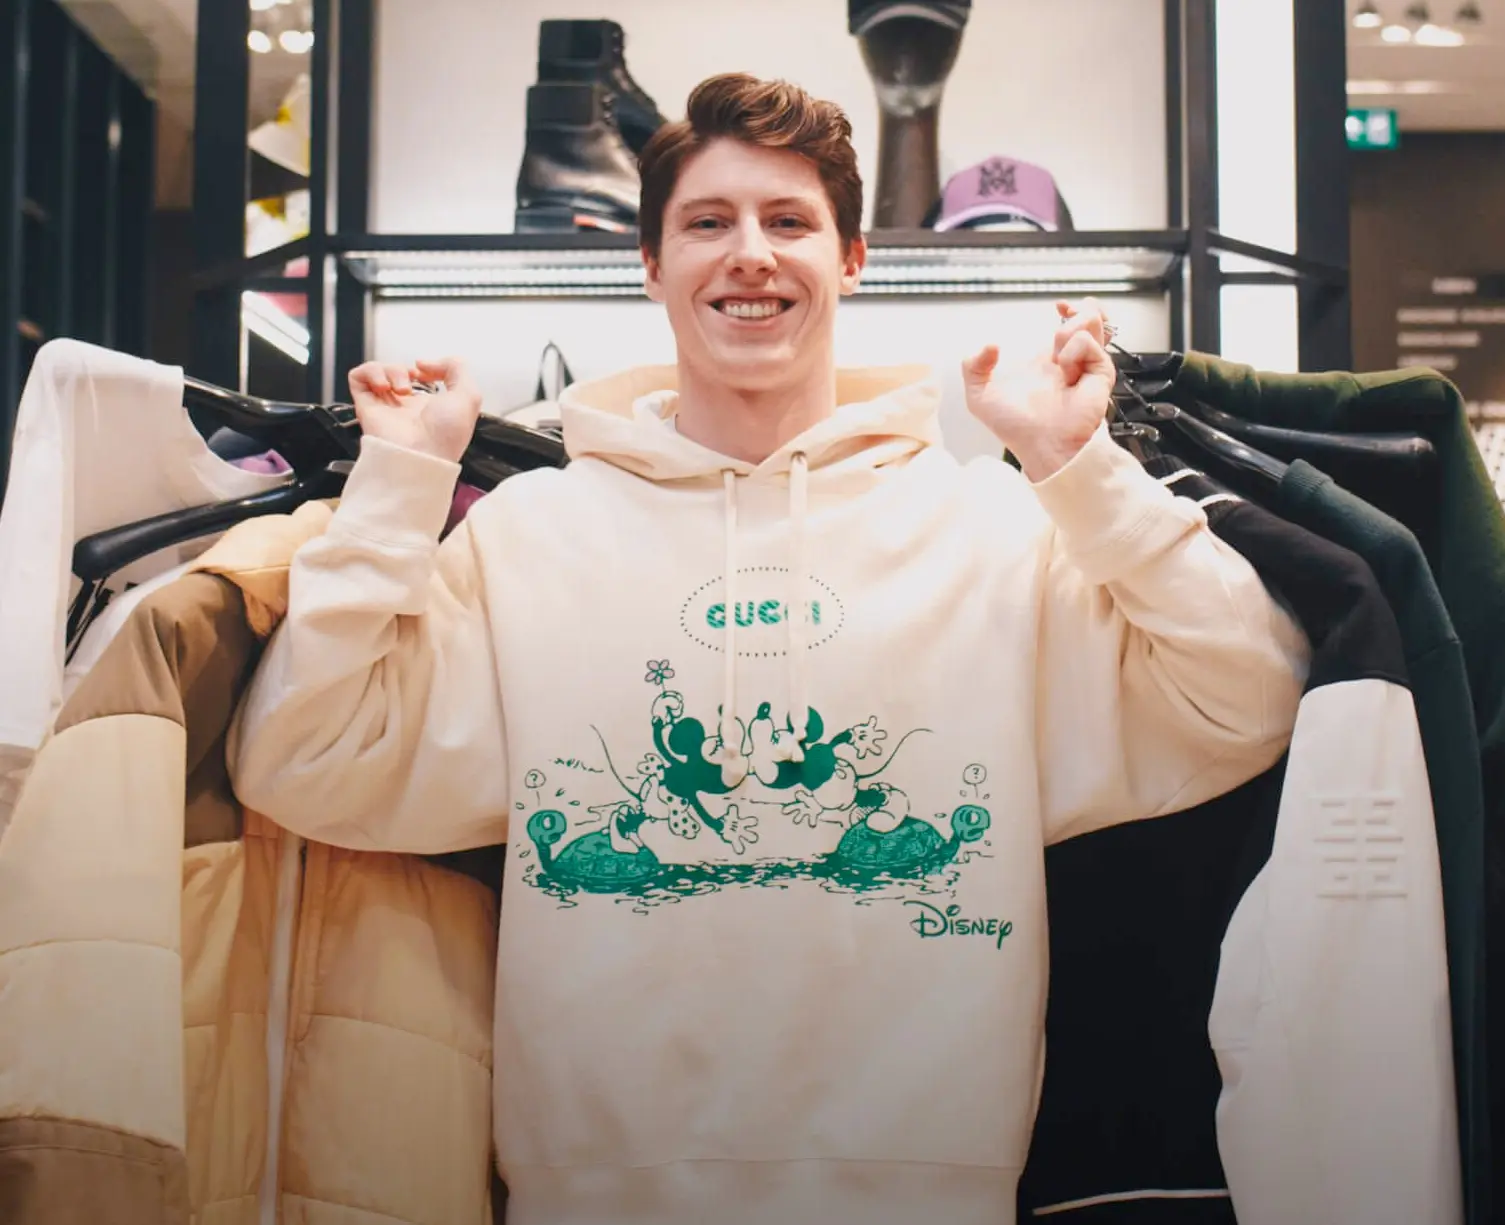 Mitch Marner holding a bunch of clothes and smiling on the show 'What do you wear?'